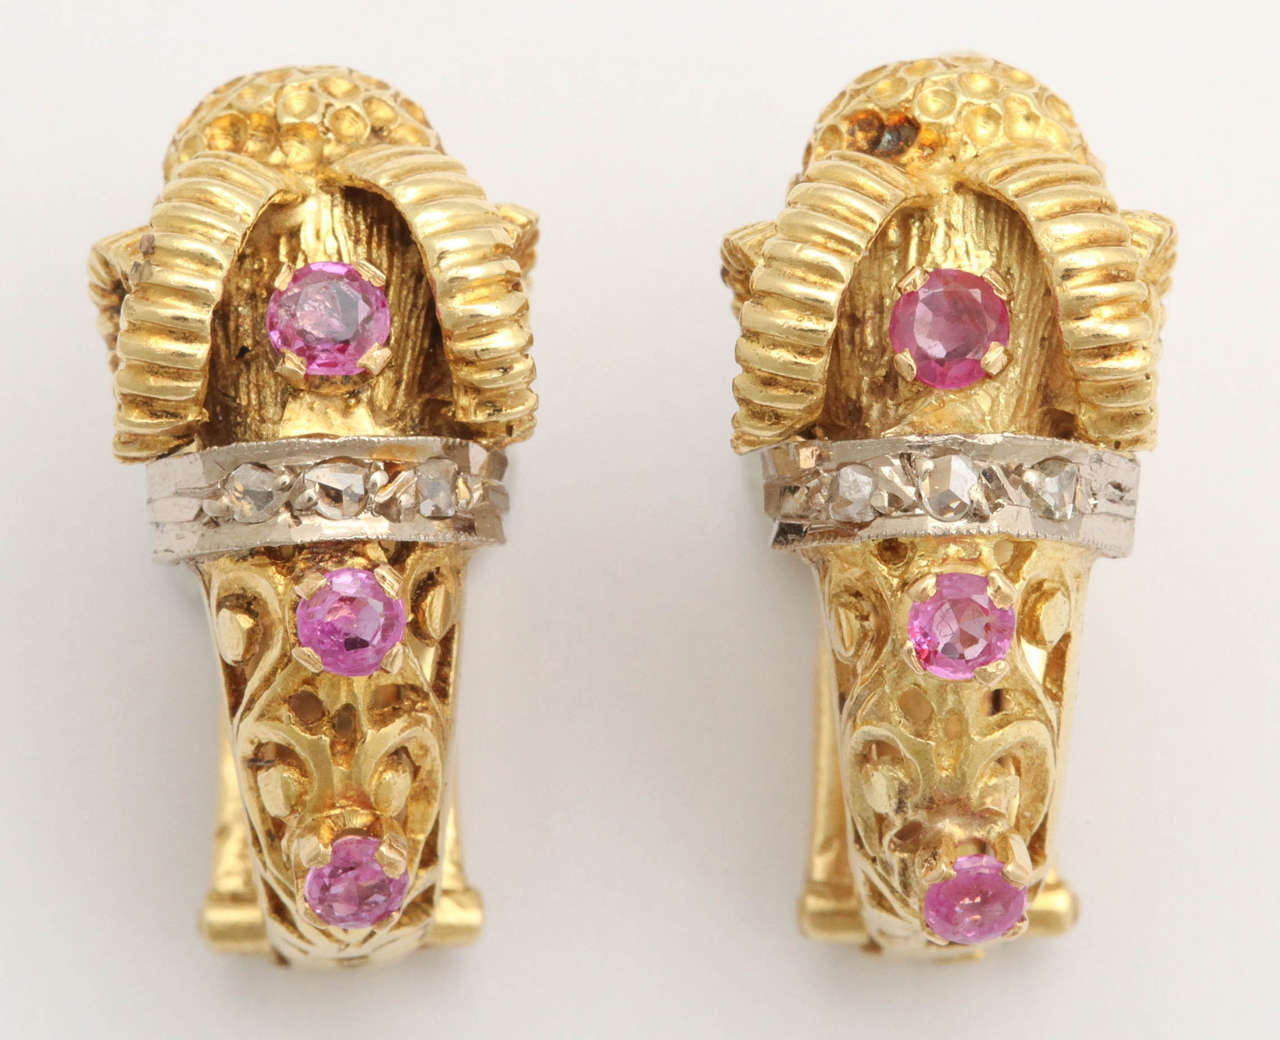 A pair of substantial Greek 18k gold ear clips each designed as an openwork 18k gold ram's head, an ancient symbol of prominence and power, set with rubies and diamonds.

With French control marks.

1 in. (2.5 cm.) long.